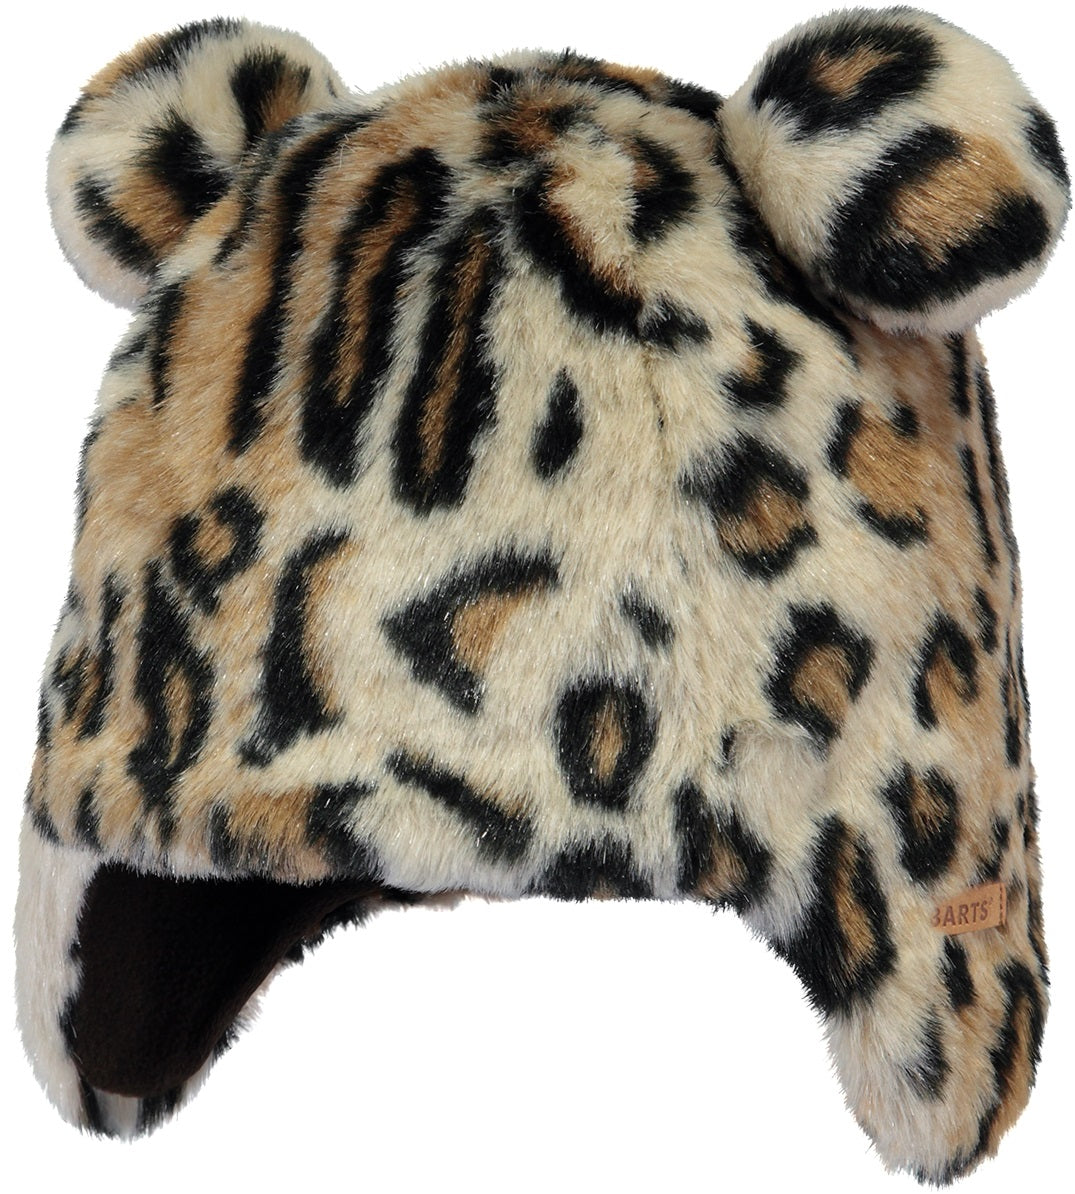 Barts Doozy Earflap leopard, 50cm up to 4 yrs